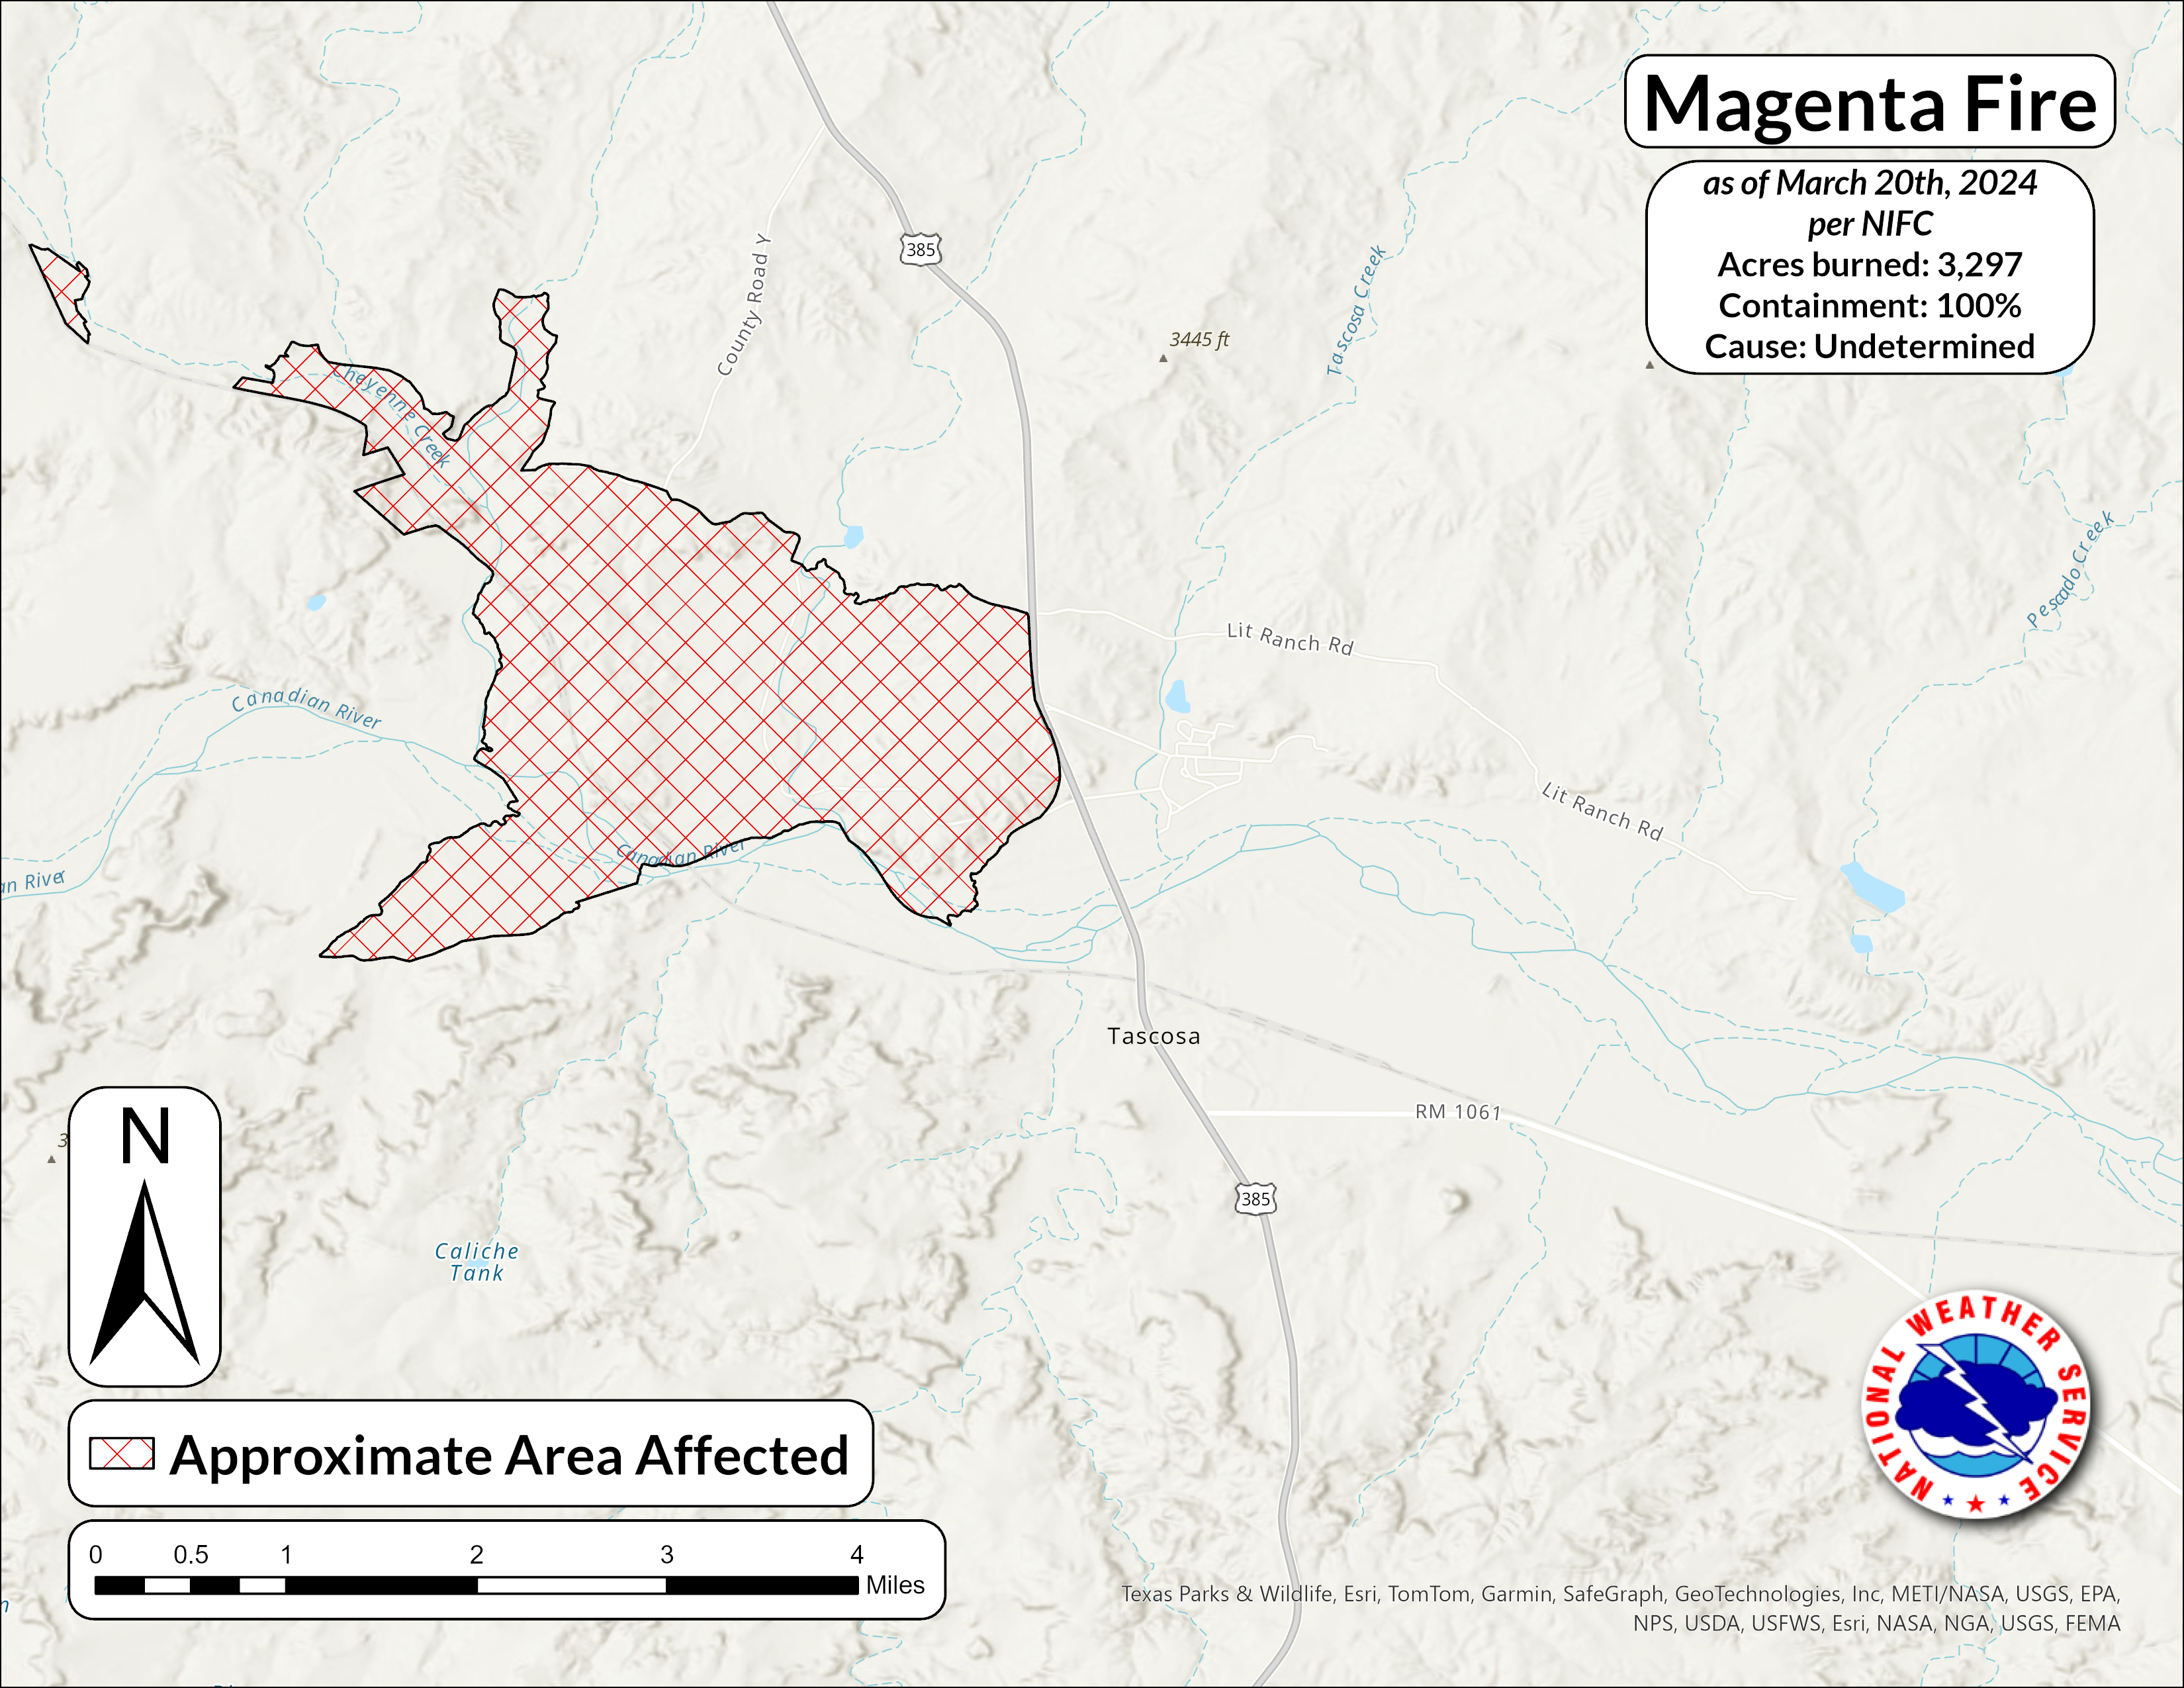 Map of the Magenta fire showing information from the National Interagency Fire Center as of March 20th, 2024. This fire burned 3,297 acres and is 100 percent contained. Per NIFC, the cause of the initial fire start is undetermined.